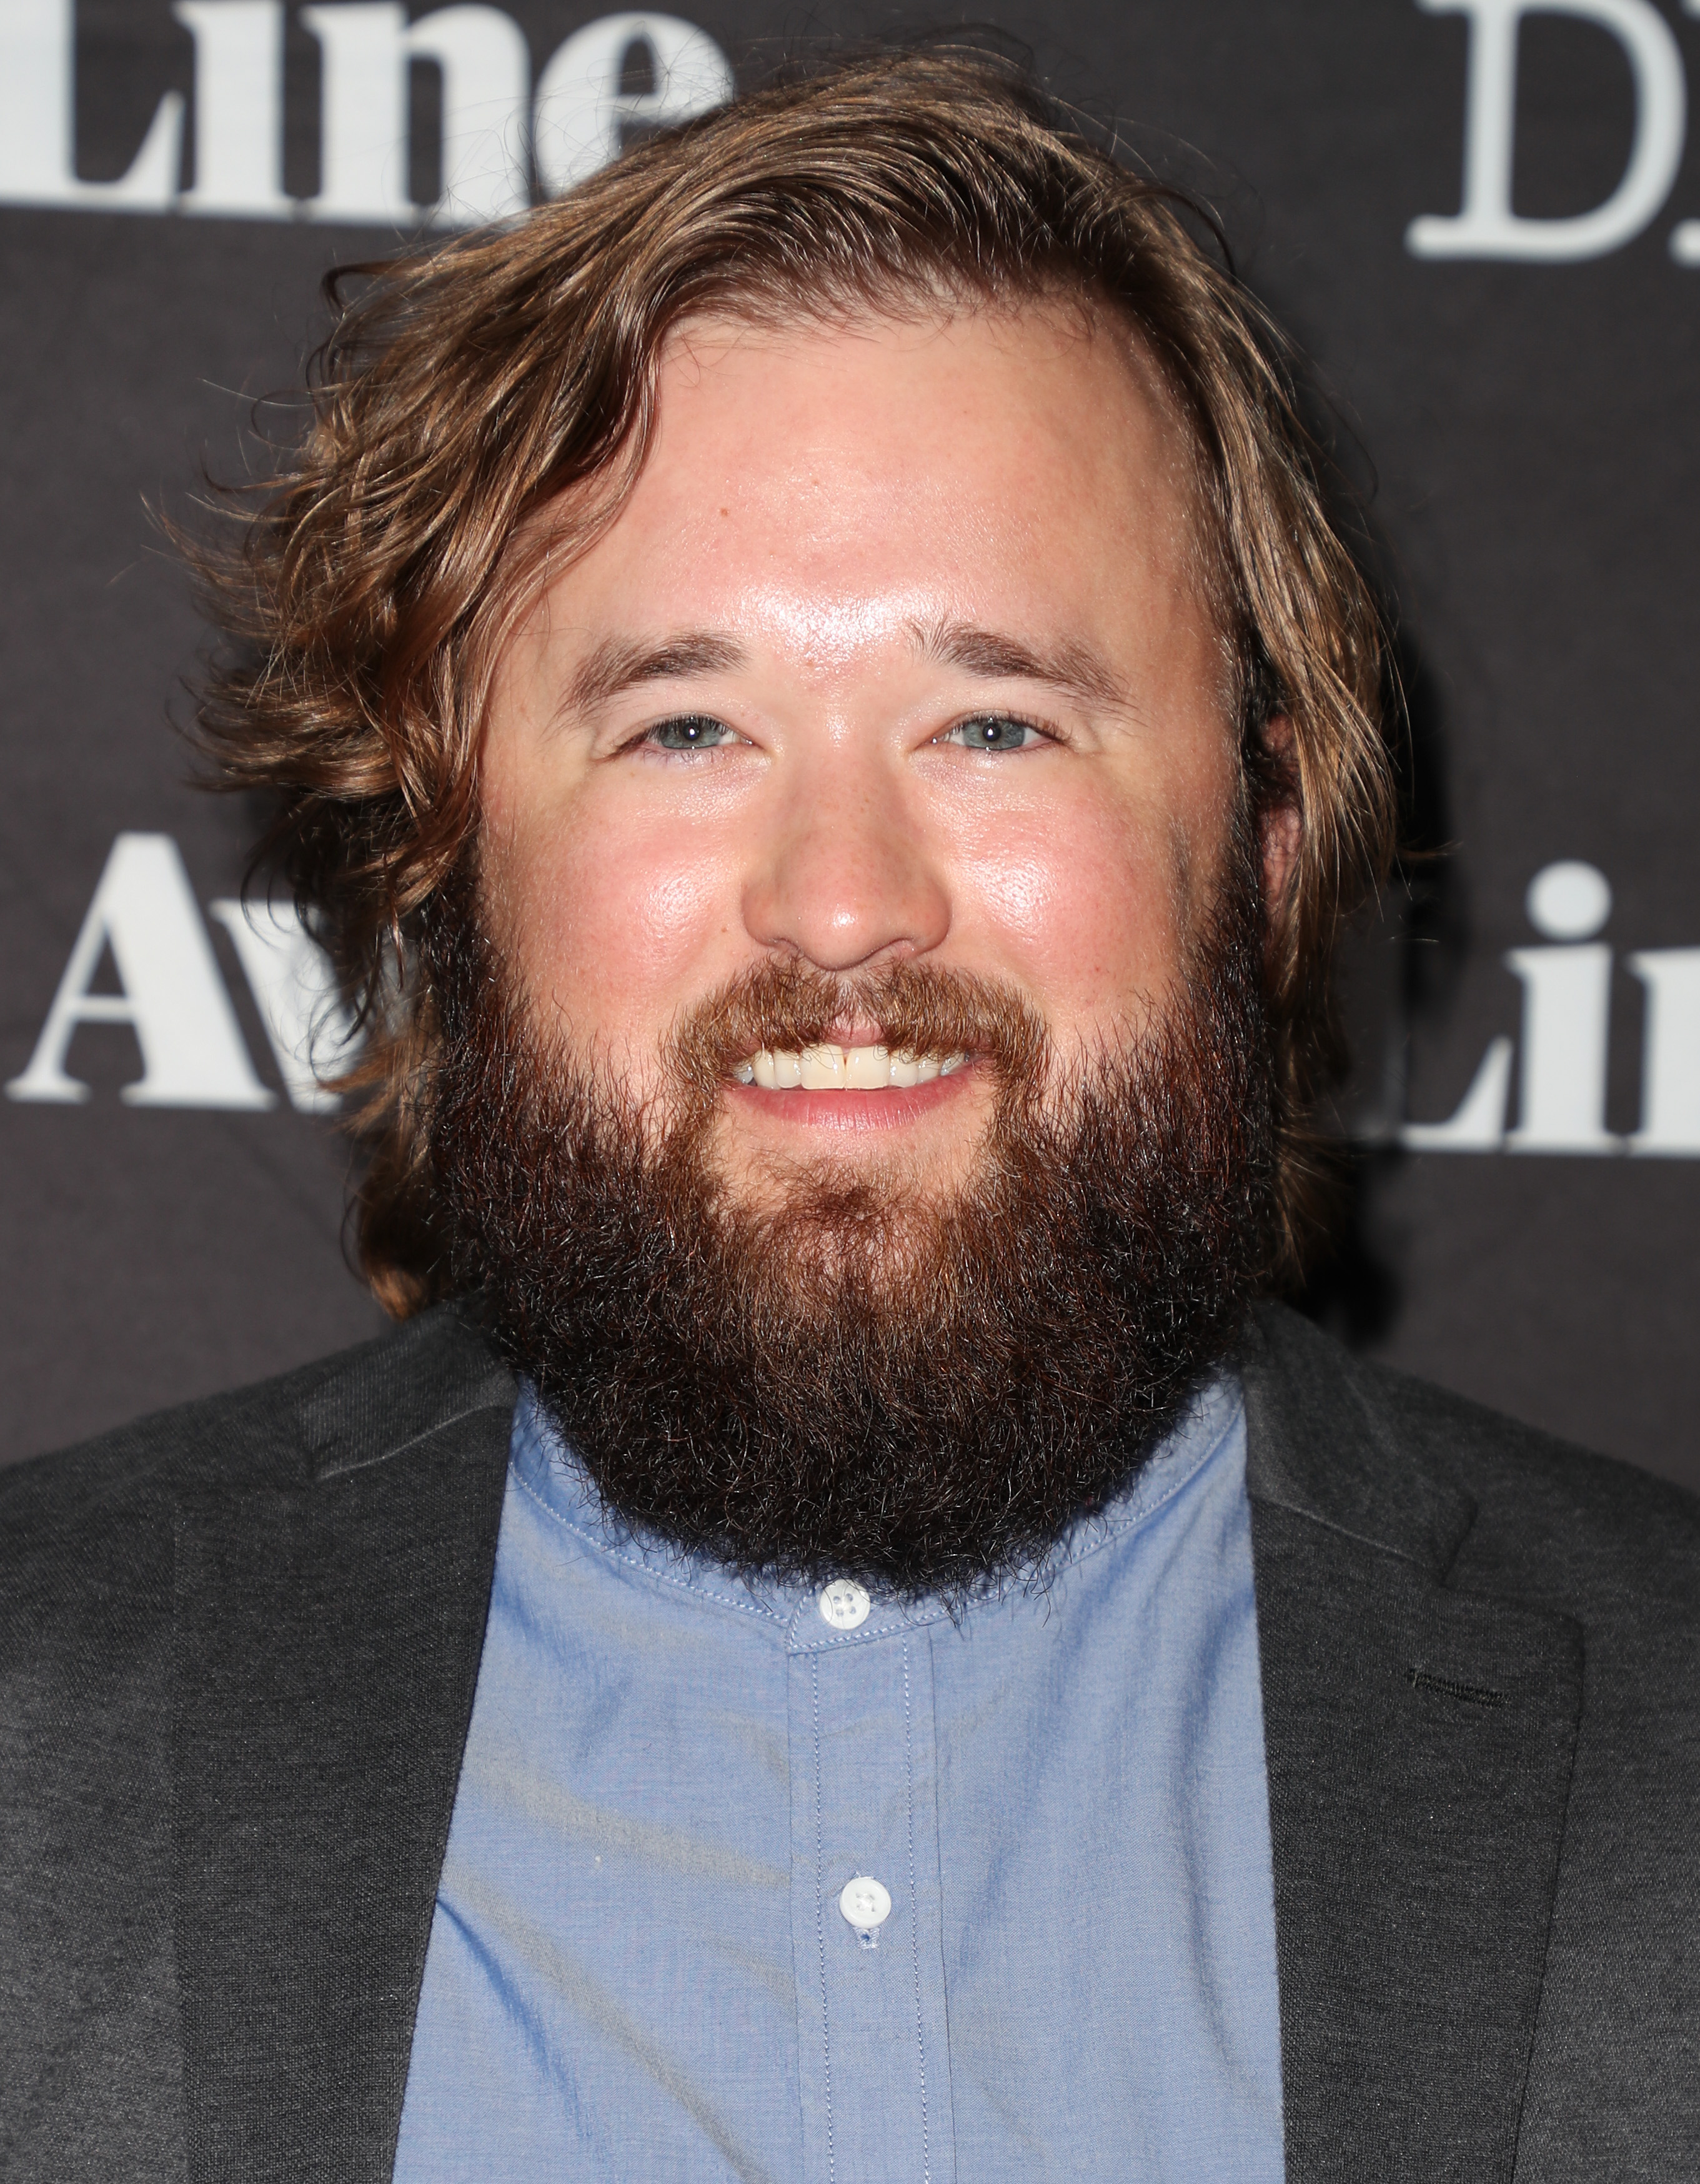 Haley Osment at the Deadline Hollywood Emmy Season Kickoff party on June 5, 2017 in Los Angeles, California. | Source: Getty Images